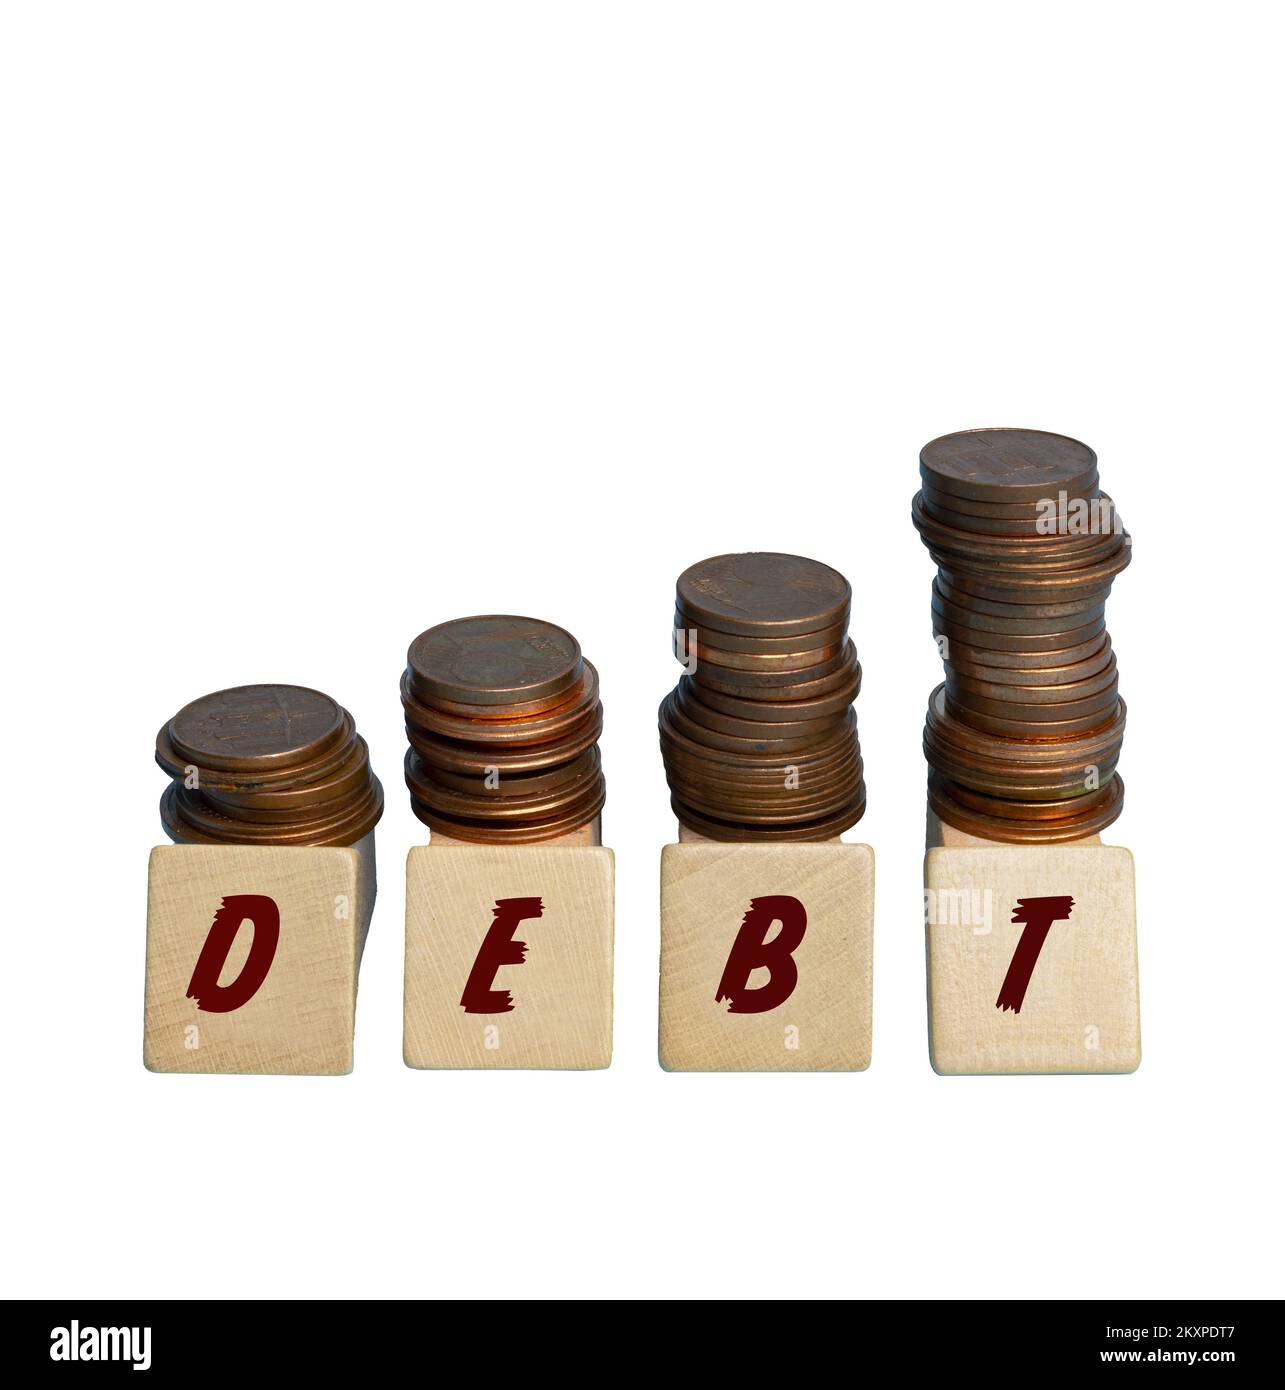 the increase in debt due to inflation on world markets Stock Photo